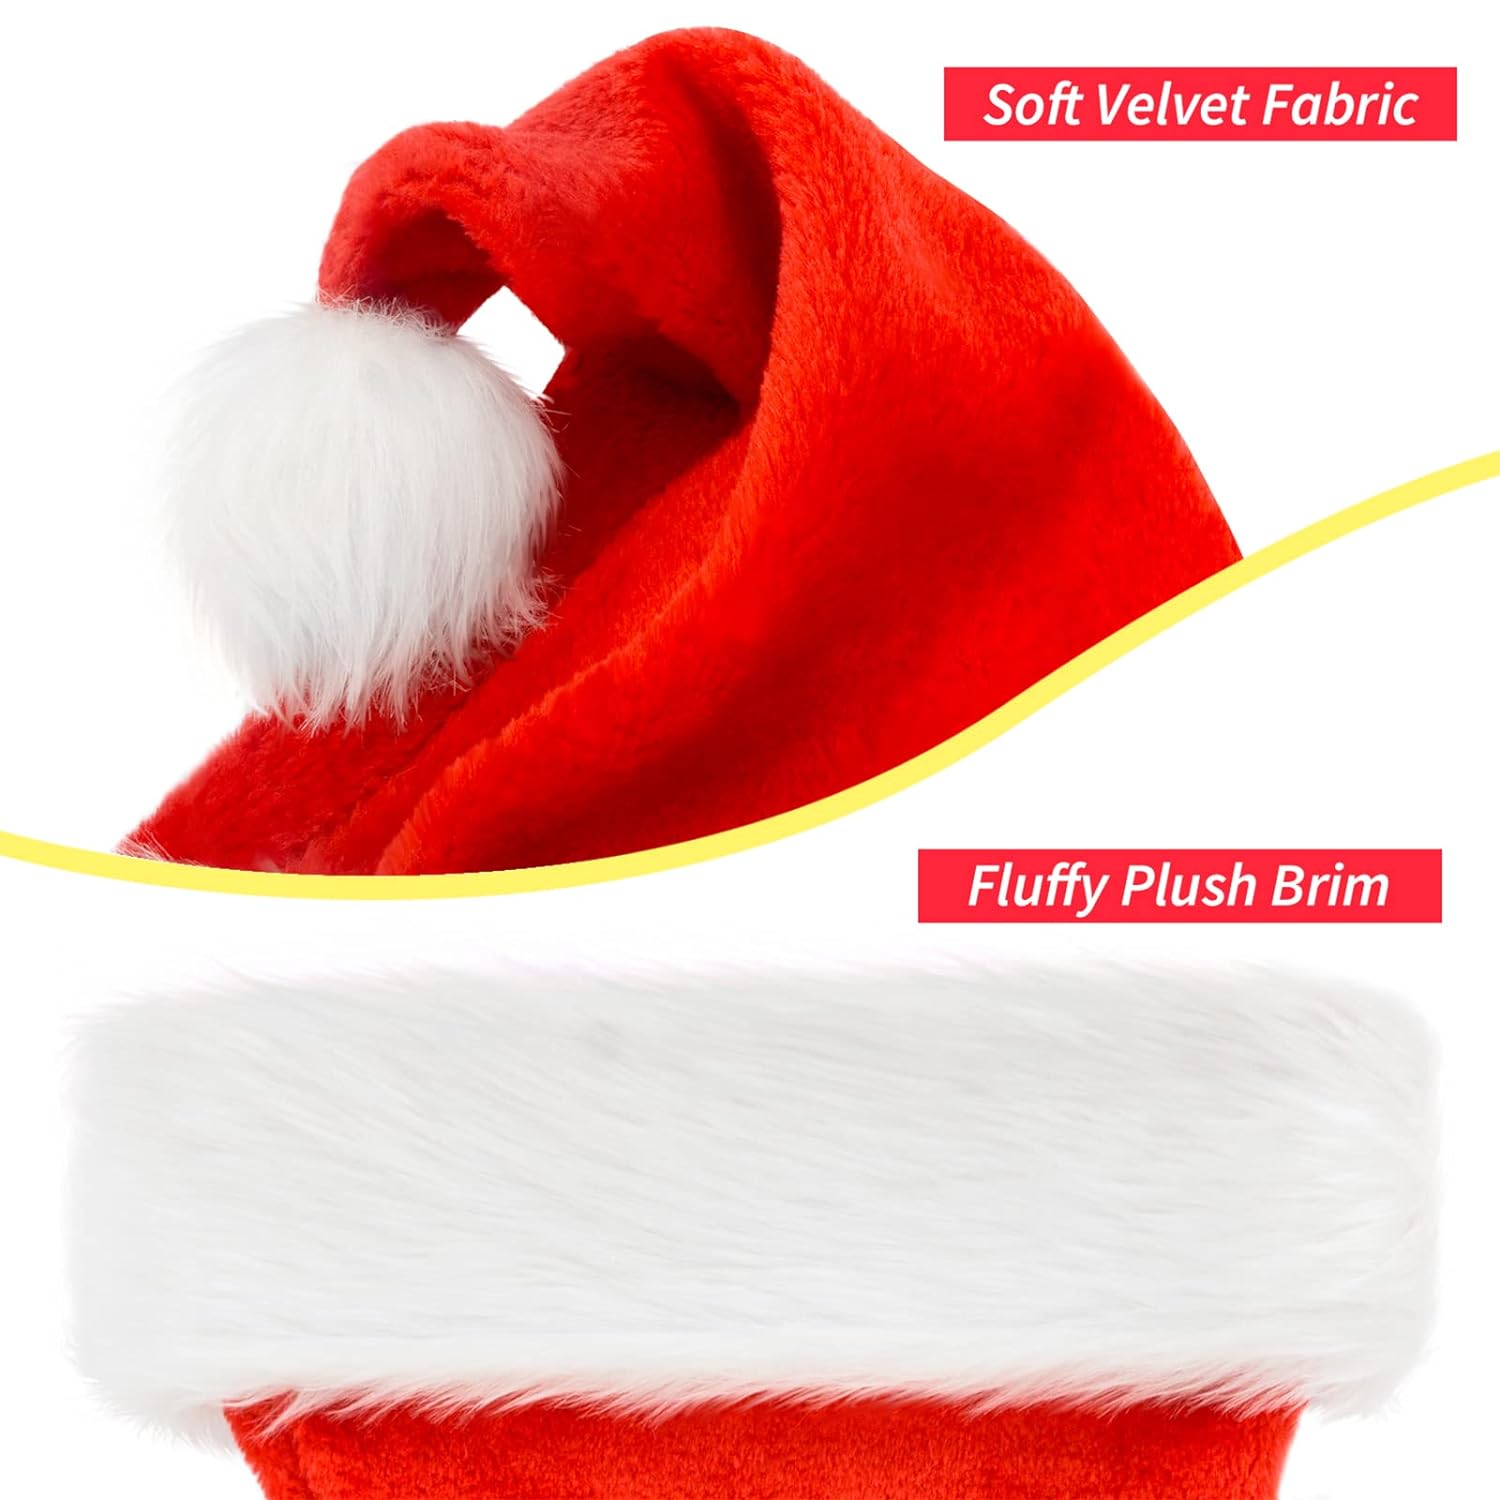 eCraftIndia Red and White Velvet Classic Fur Merry Christmas Hats, Santa Claus Caps for kids and Adults - XMAS Caps, Santa Hats for Christmas, New Year, Festive Holiday Party Celebration (Set of 30) 6